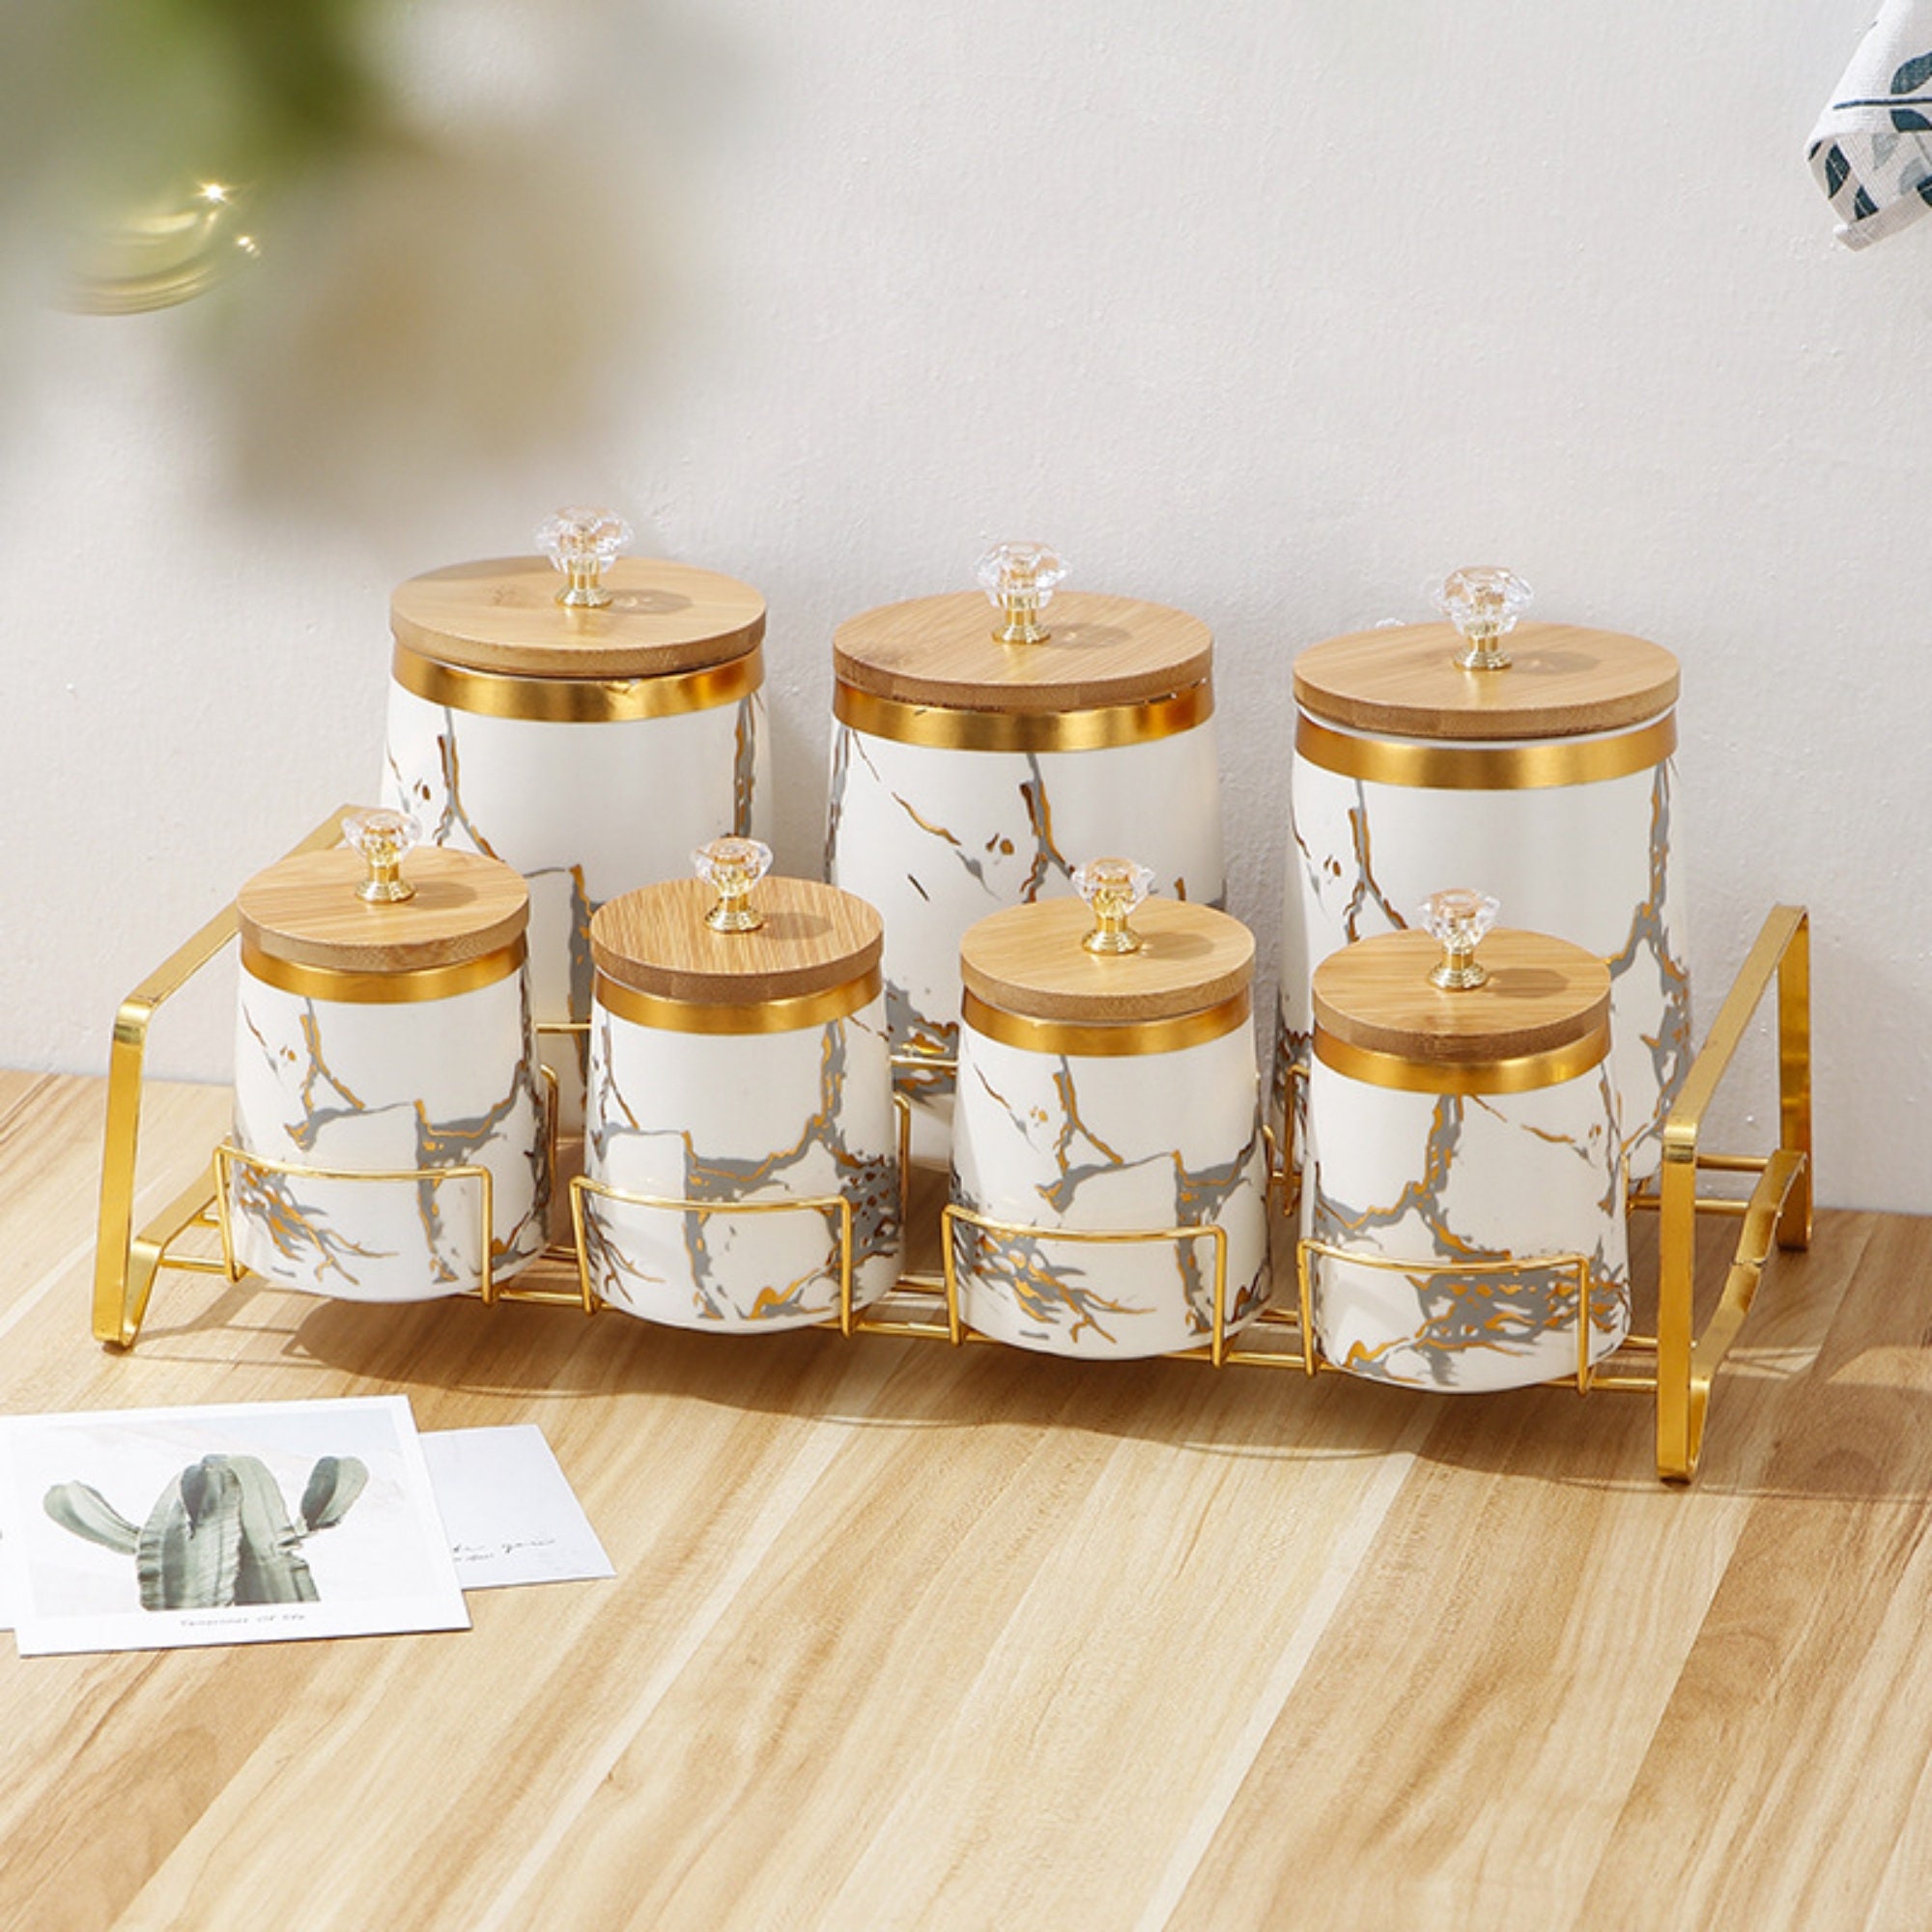 7pcs/set, Multifunctional Revolving Spice Rack with 6 Spice Jars